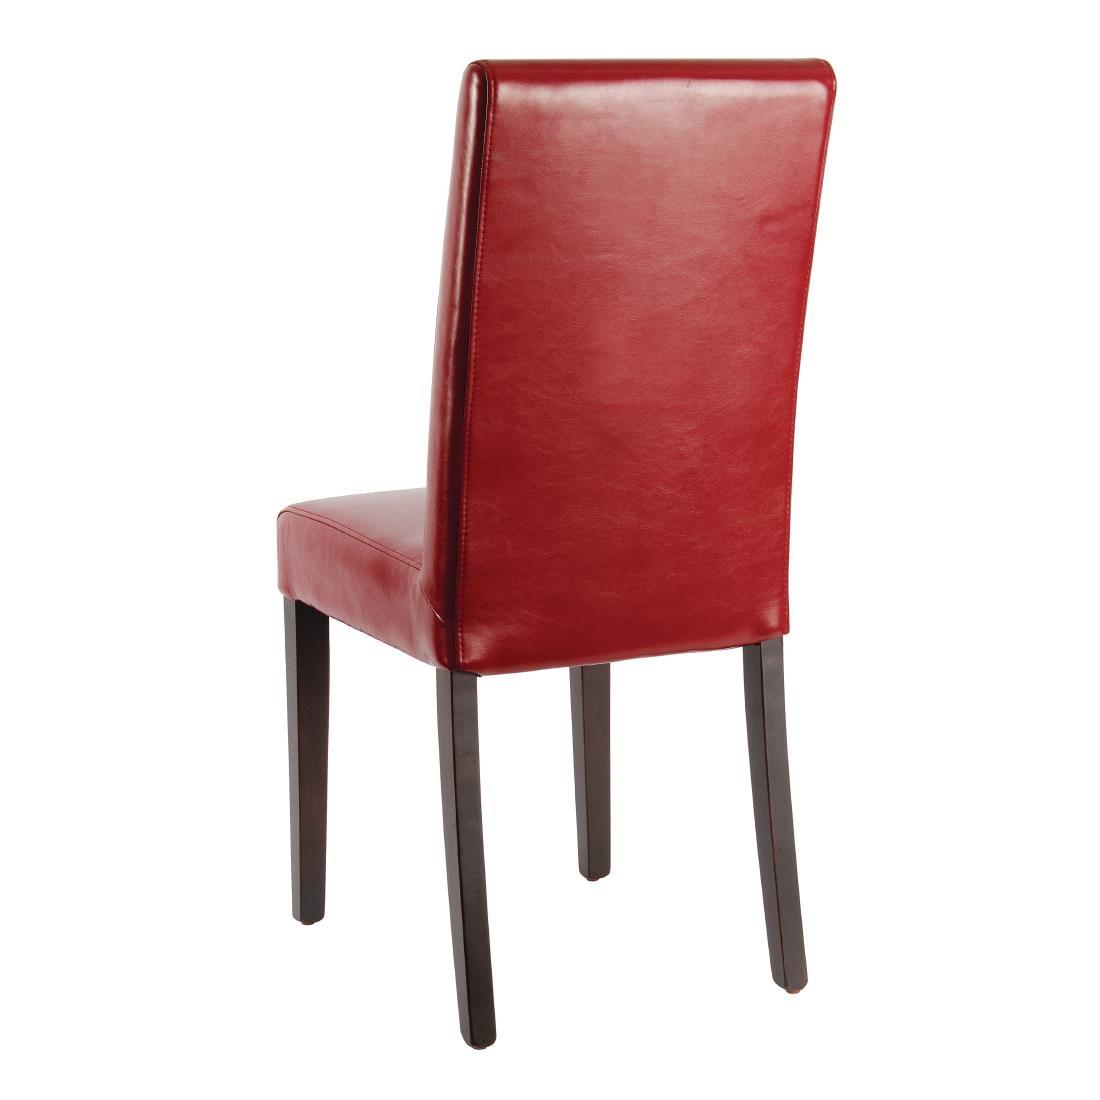 Bolero Faux Leather Dining Chairs Red (Pack of 2) - GH443  - 2